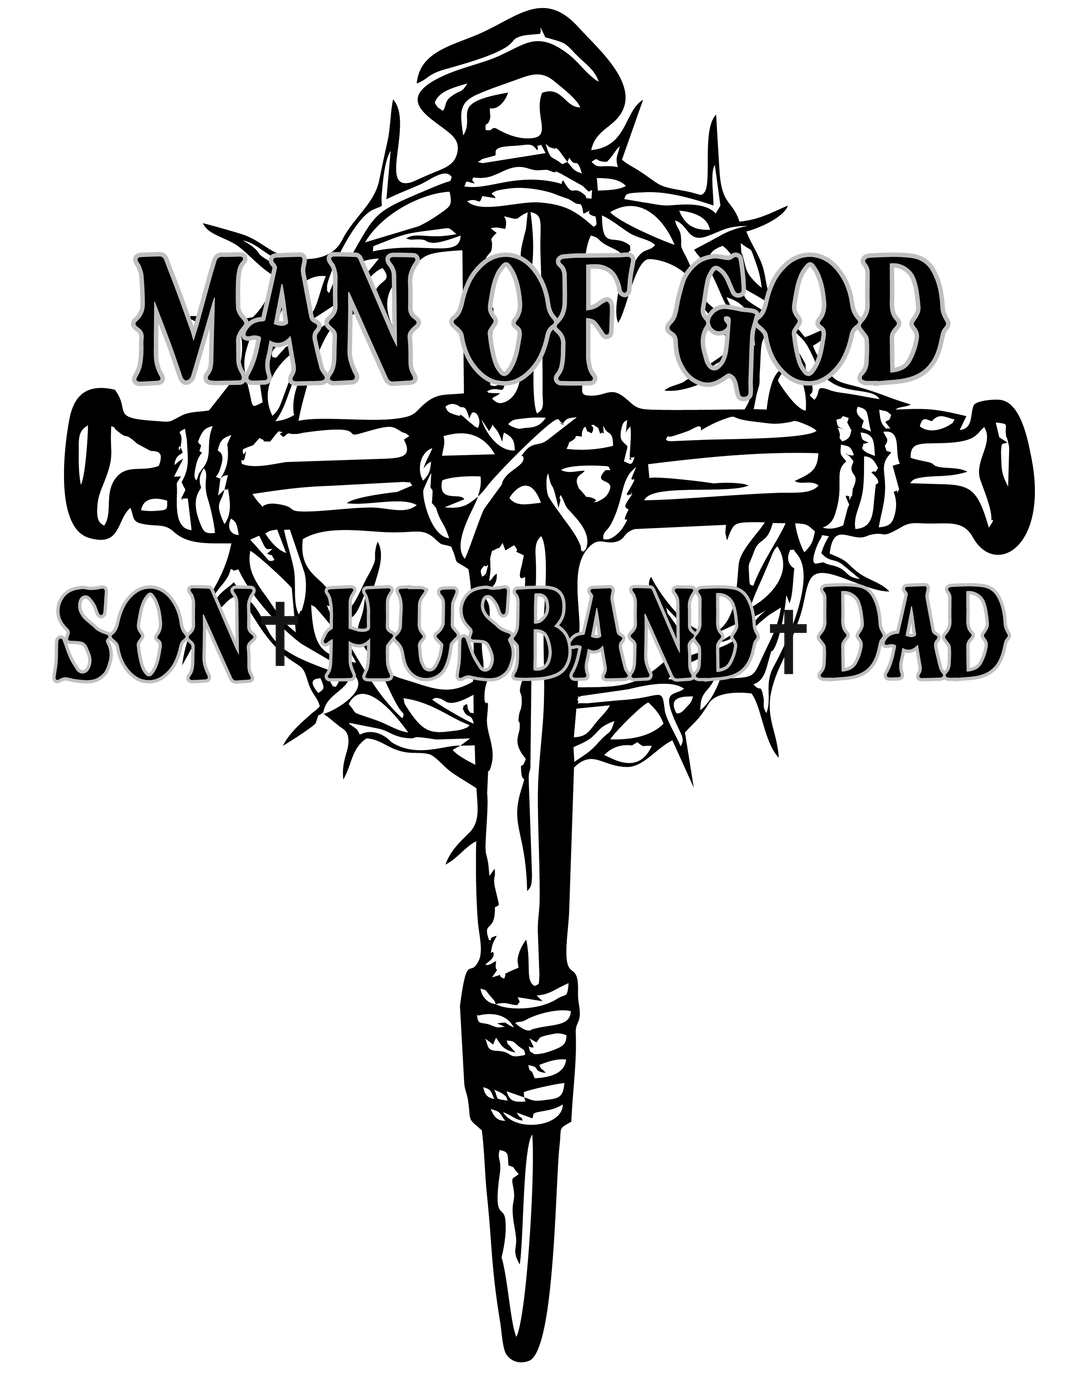 Man of God Son Husband Dad Tee: Garment-dyed cotton t-shirt with a relaxed fit. Ring-spun fabric for coziness, double-needle stitching for durability, and tubular shape retention. Sizes XS to 4XL.